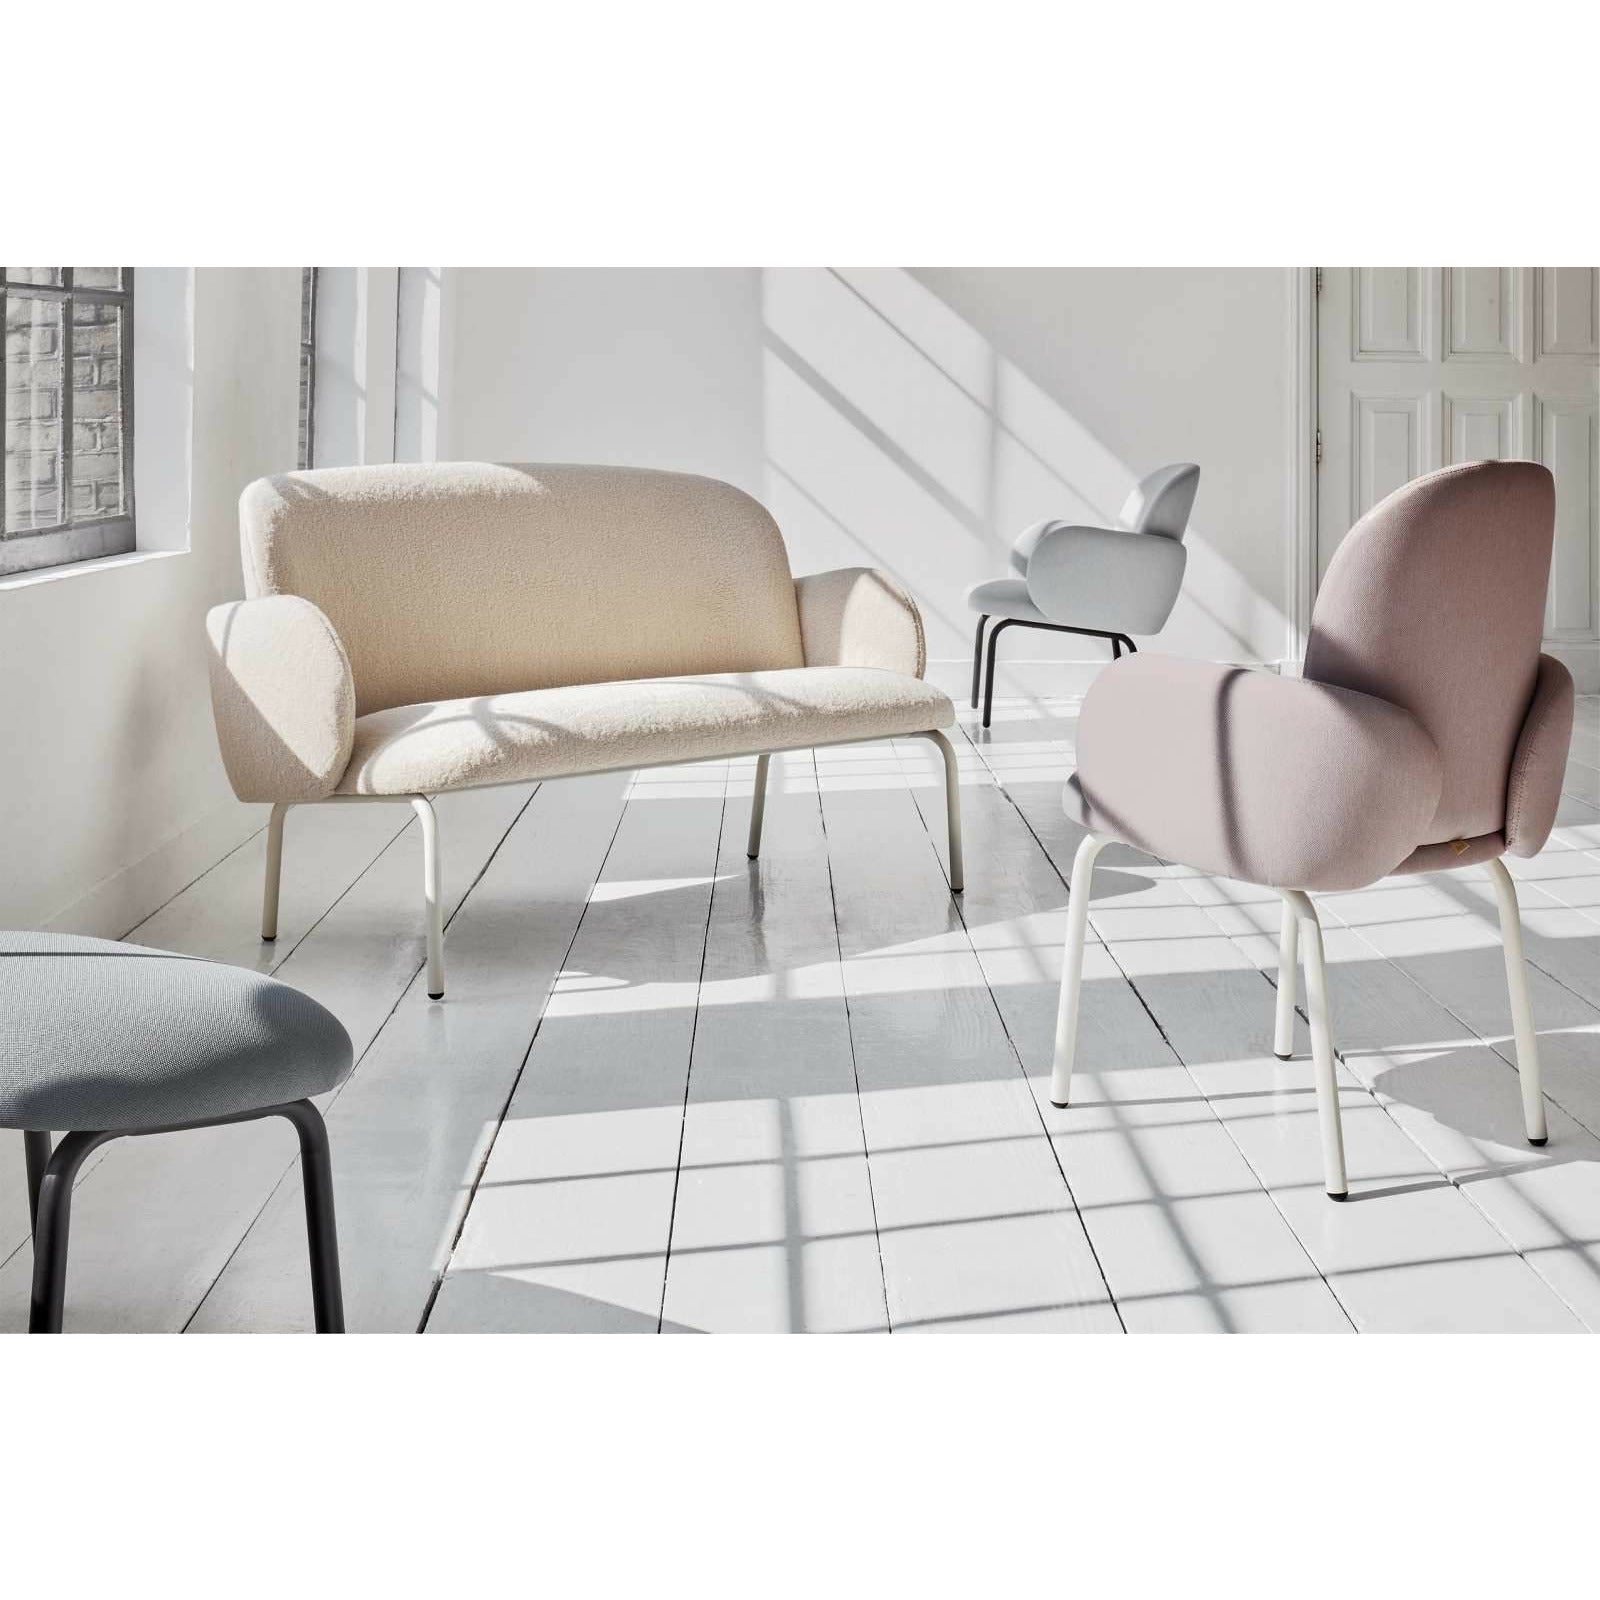 Puik Dost Dost Chair Steel, gris clair